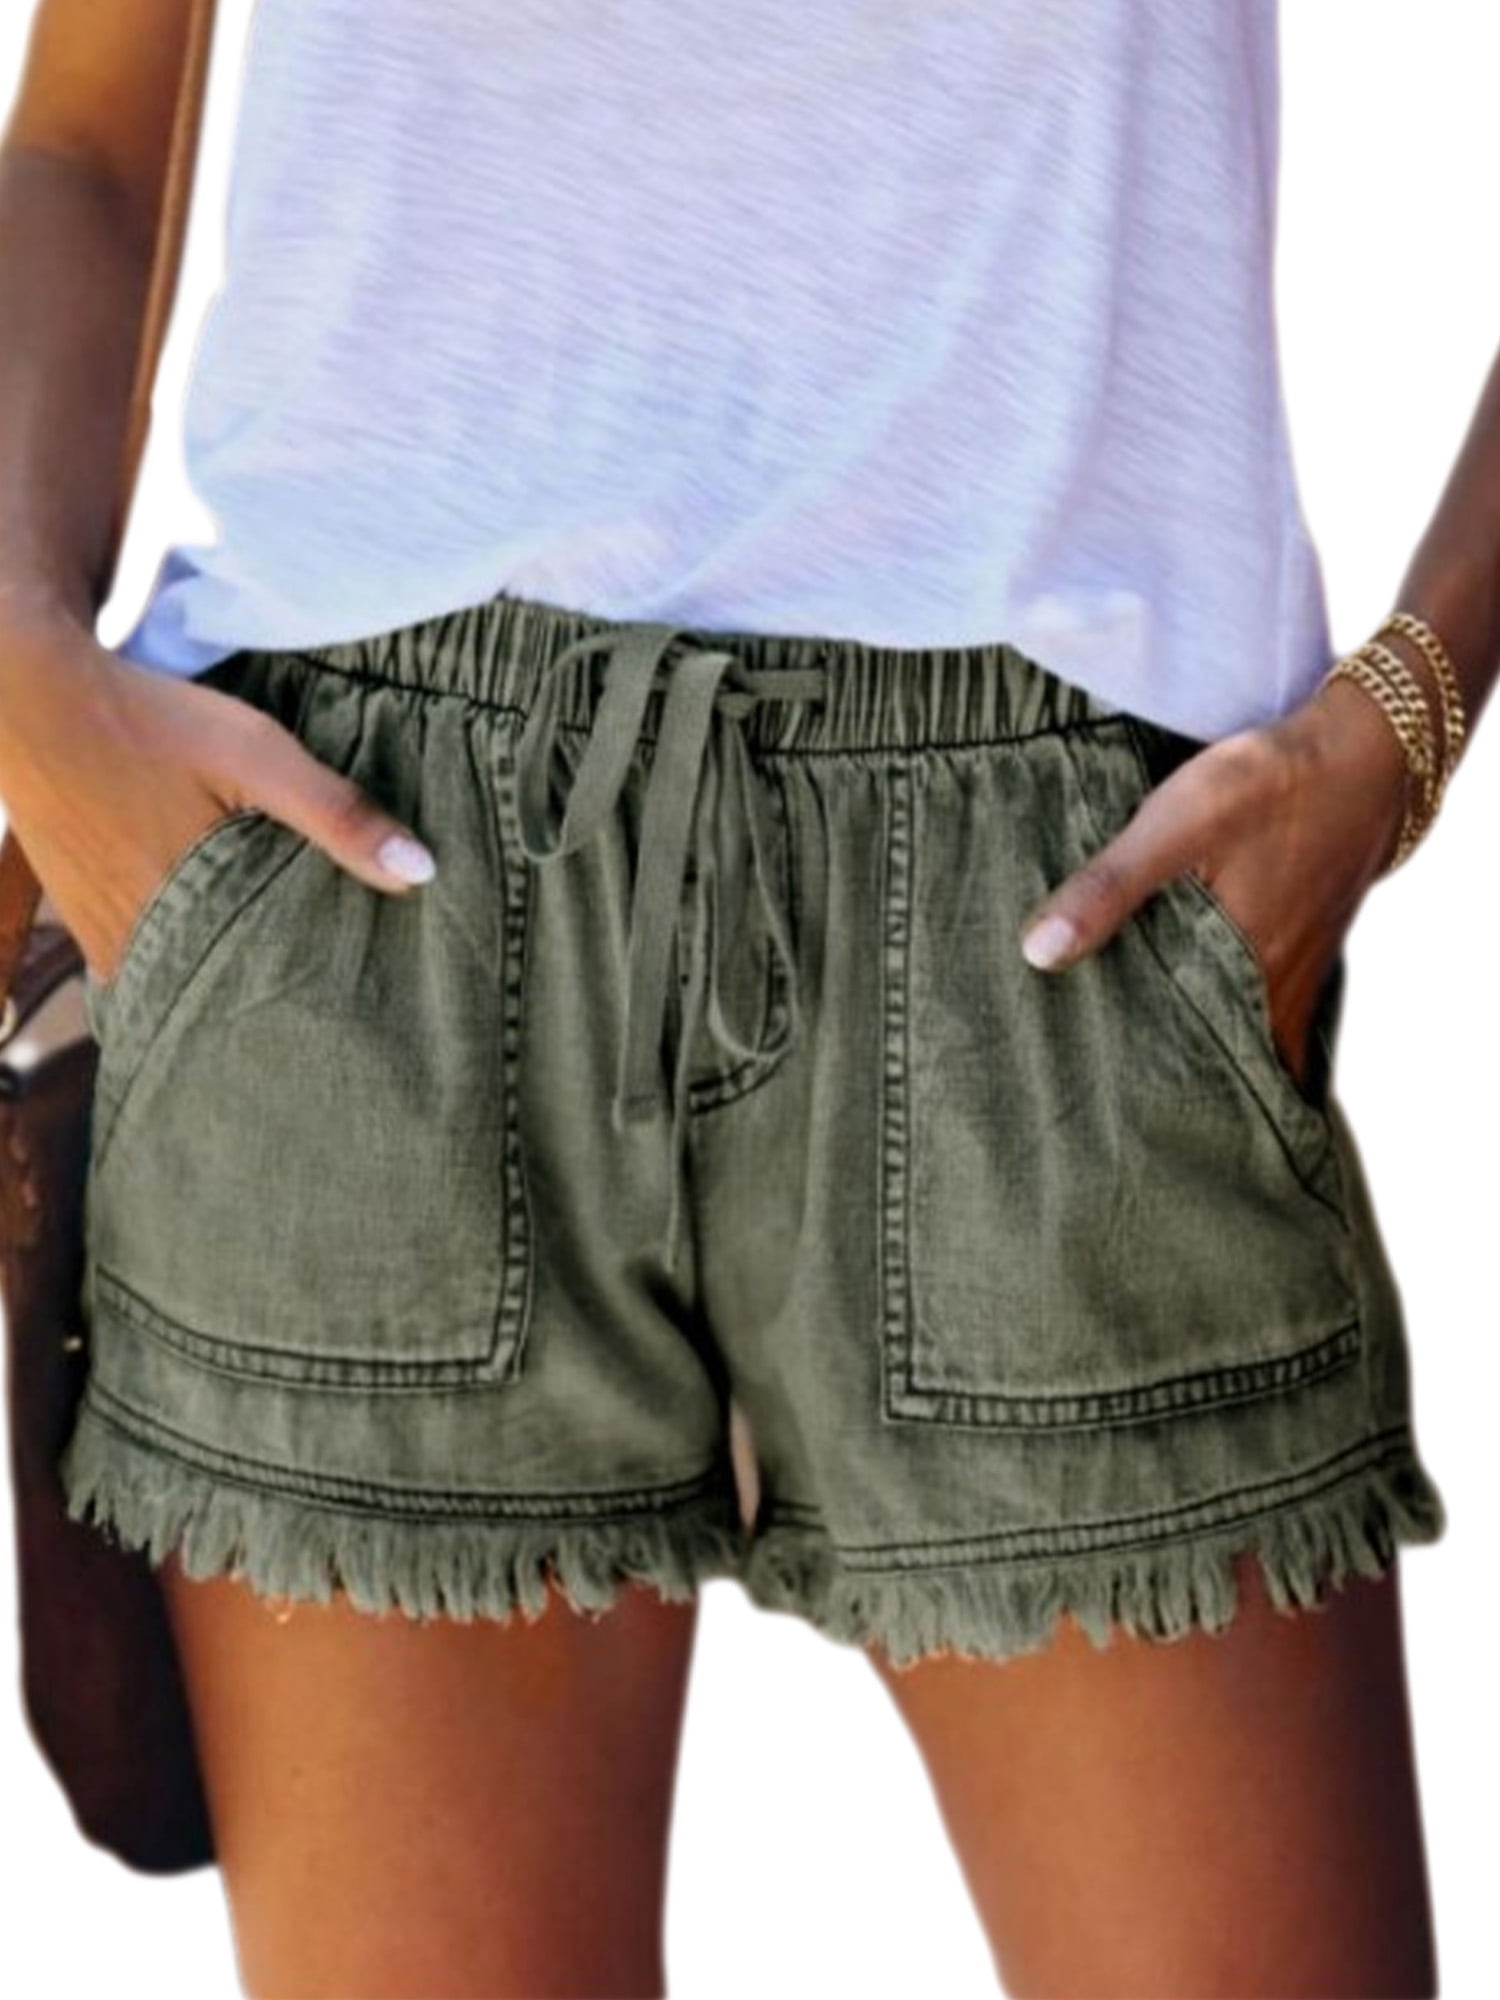 Sexy Dance Ladies Shorts Casual Summer Denim Shorts for Women Mid Waist  Stretchy Jean Pull On Shorts Junior Lace Up Fitting Tassels Hot Pants 